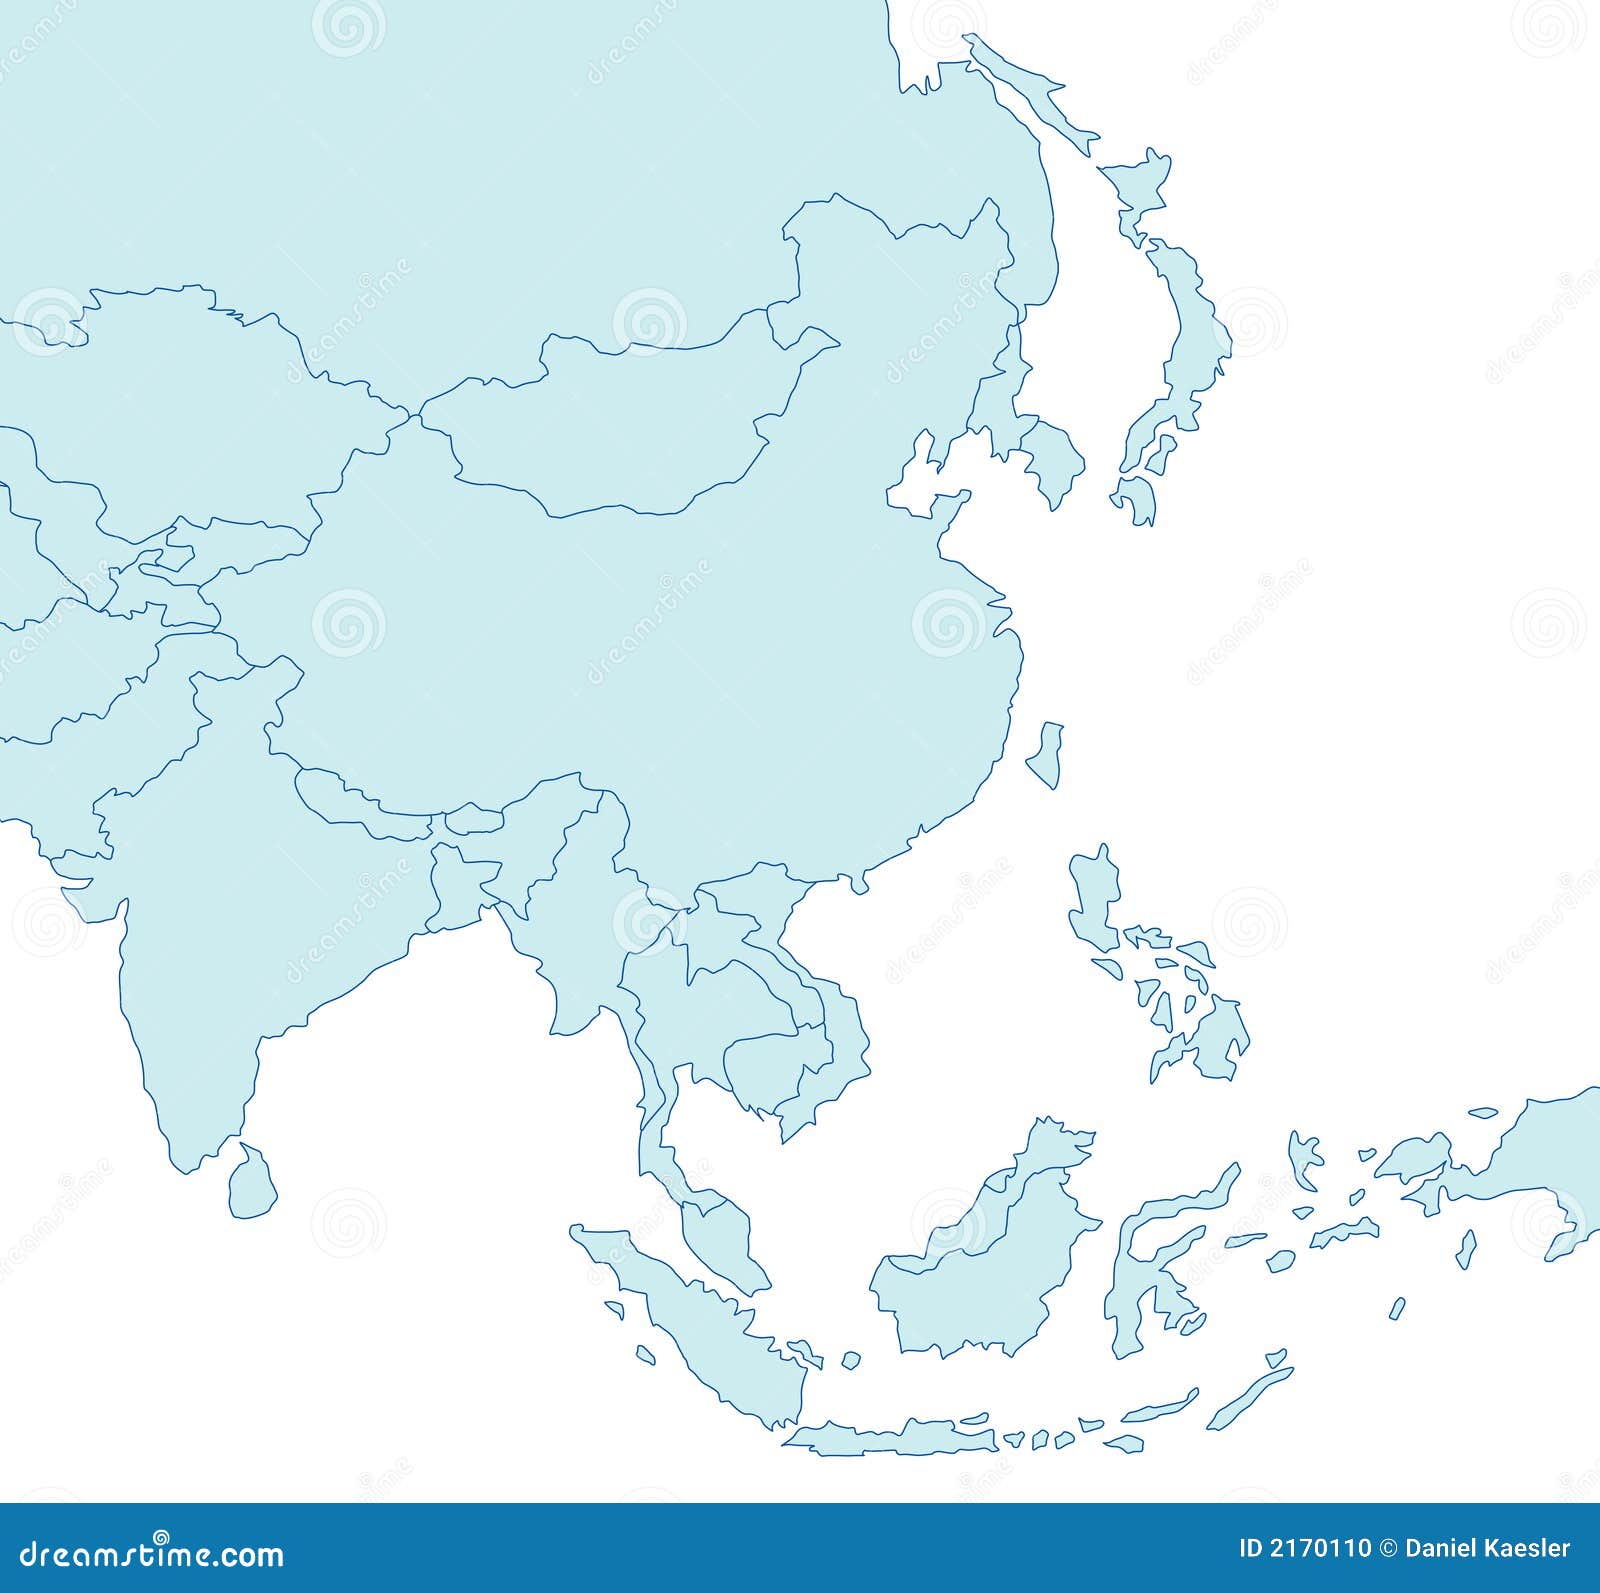 clipart map of asia - photo #6